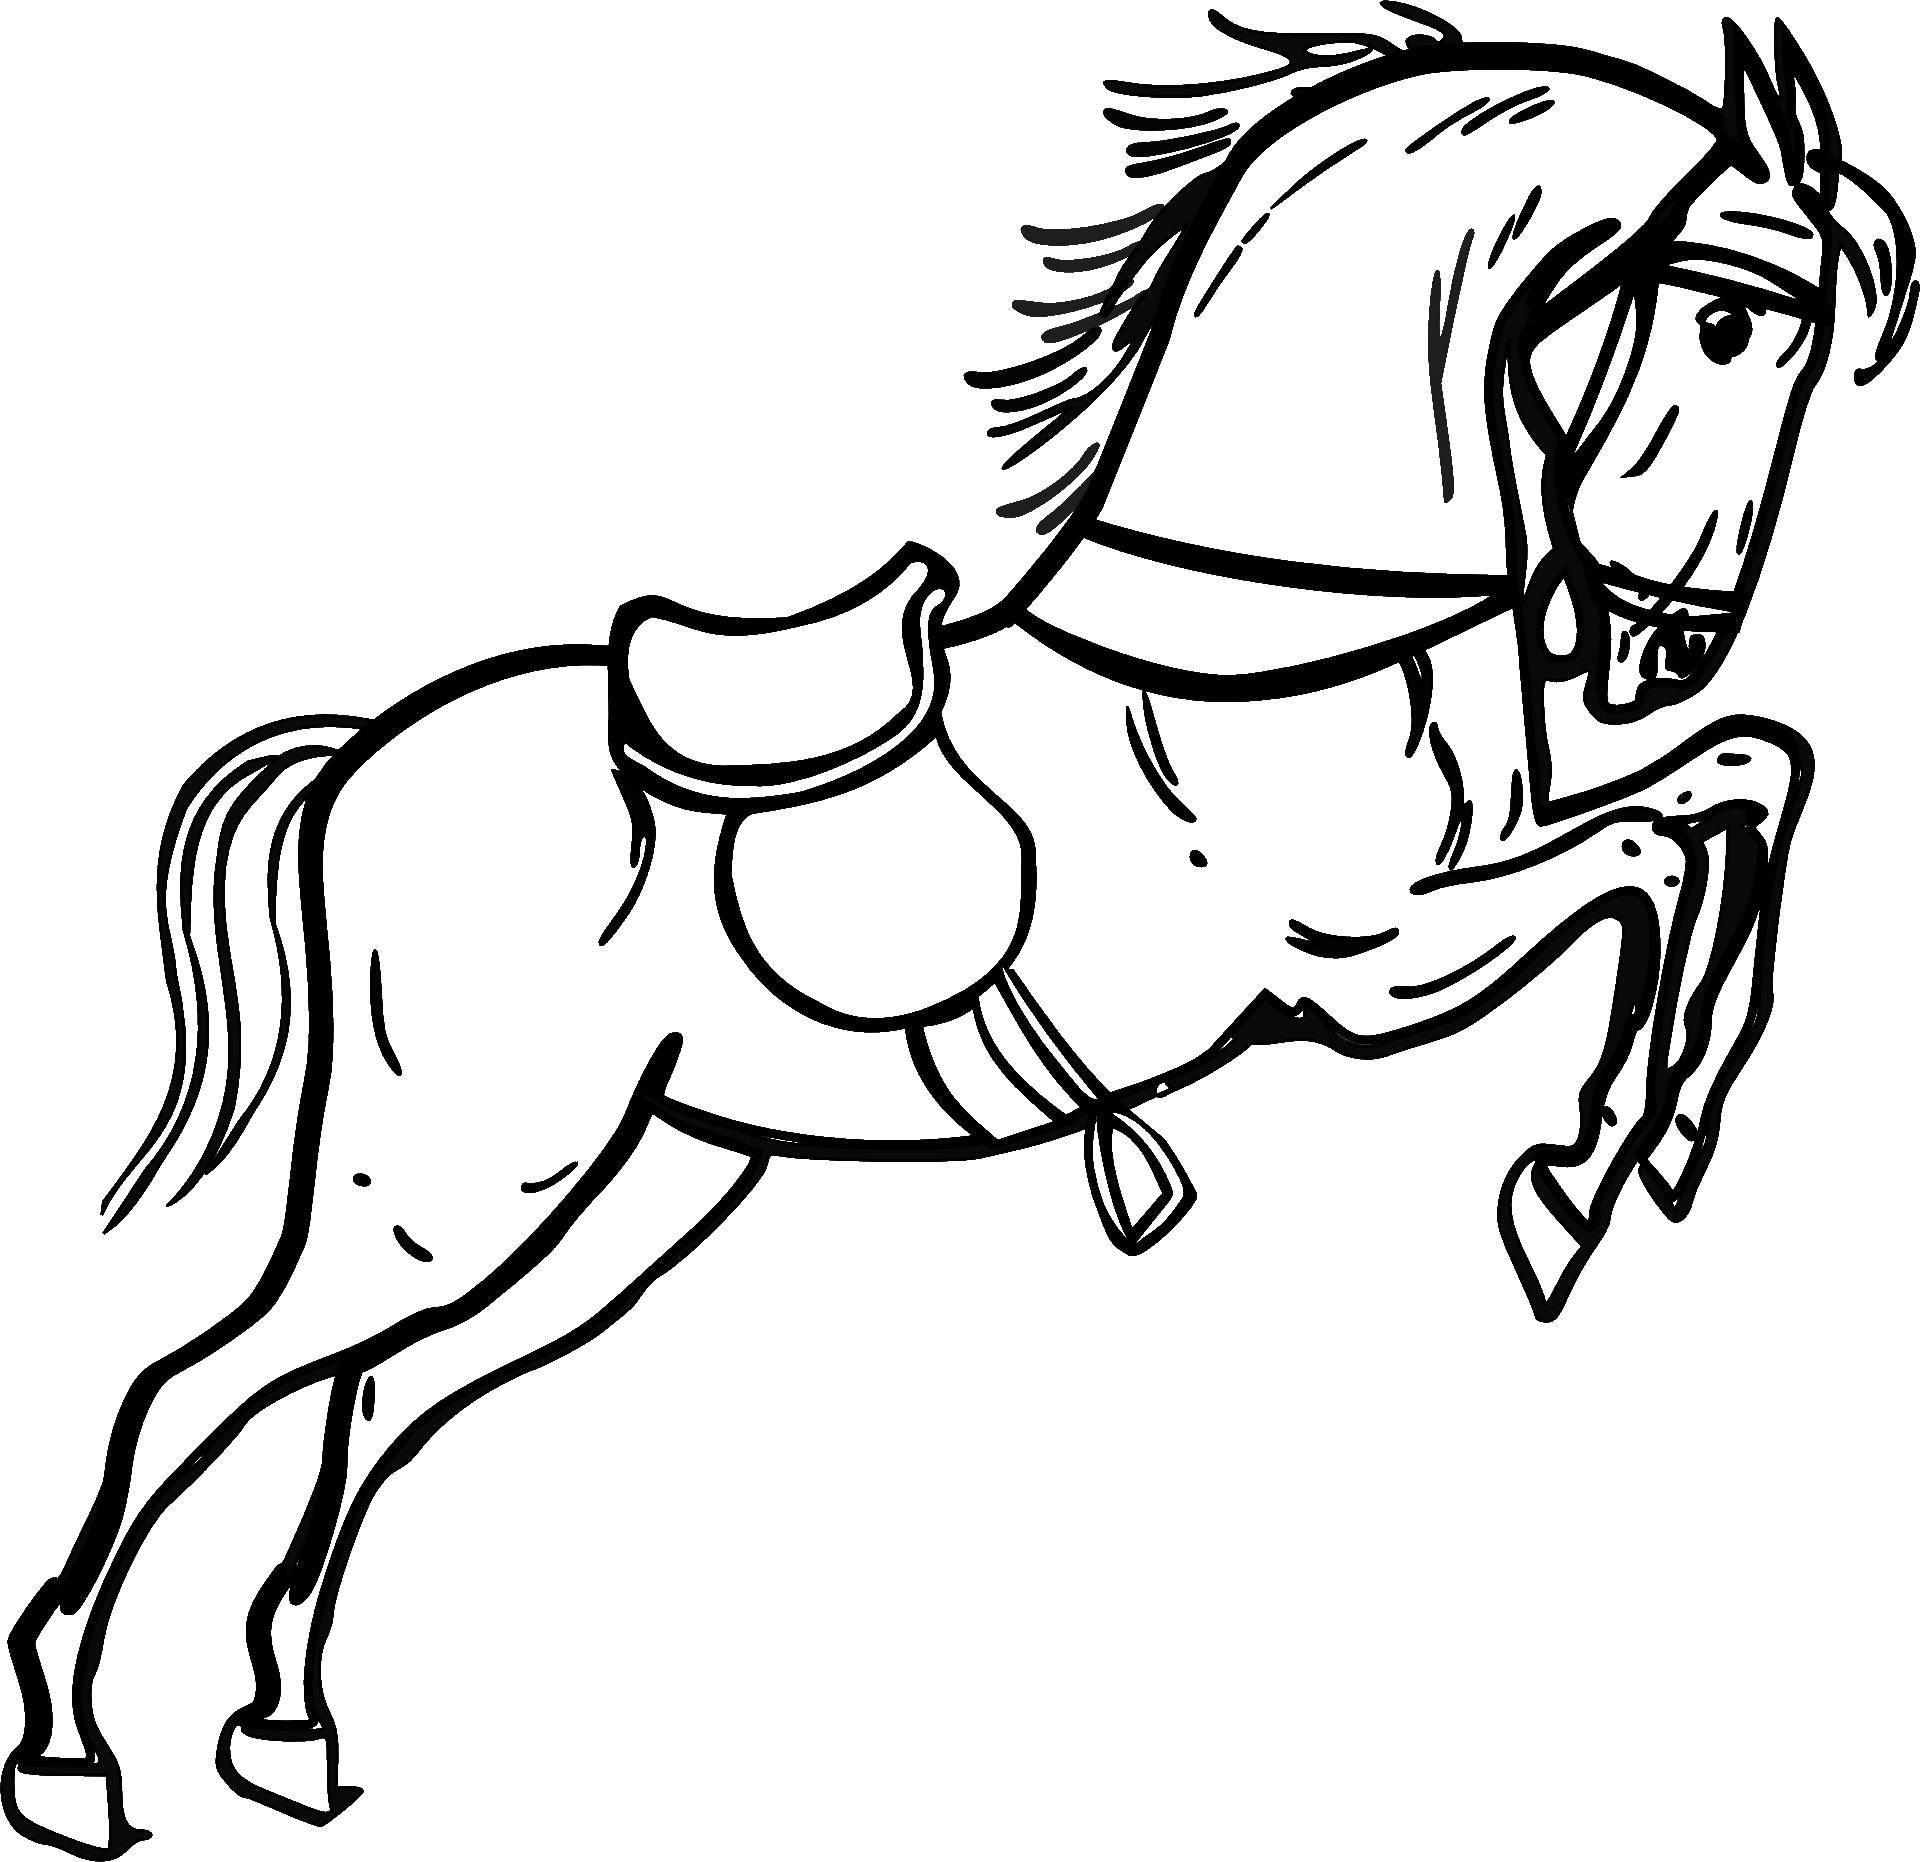 Coloring Graceful horse. Category Animals. Tags:  Animals, horse.